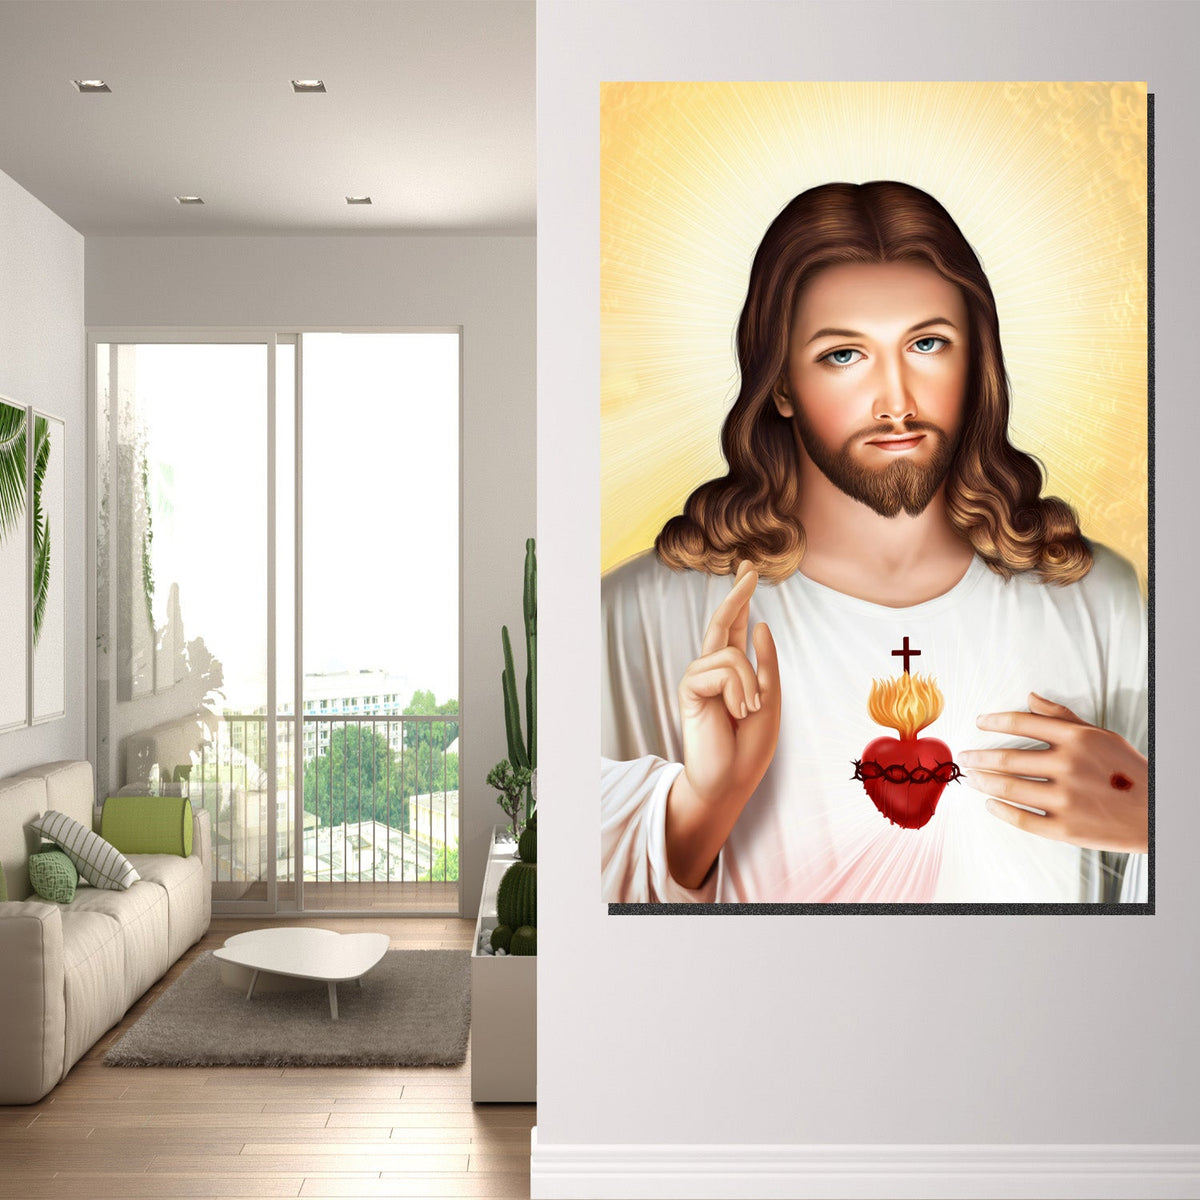 https://cdn.shopify.com/s/files/1/0387/9986/8044/products/DivineMercyoftheSacredHeartCanvasArtprintStretched-2.jpg